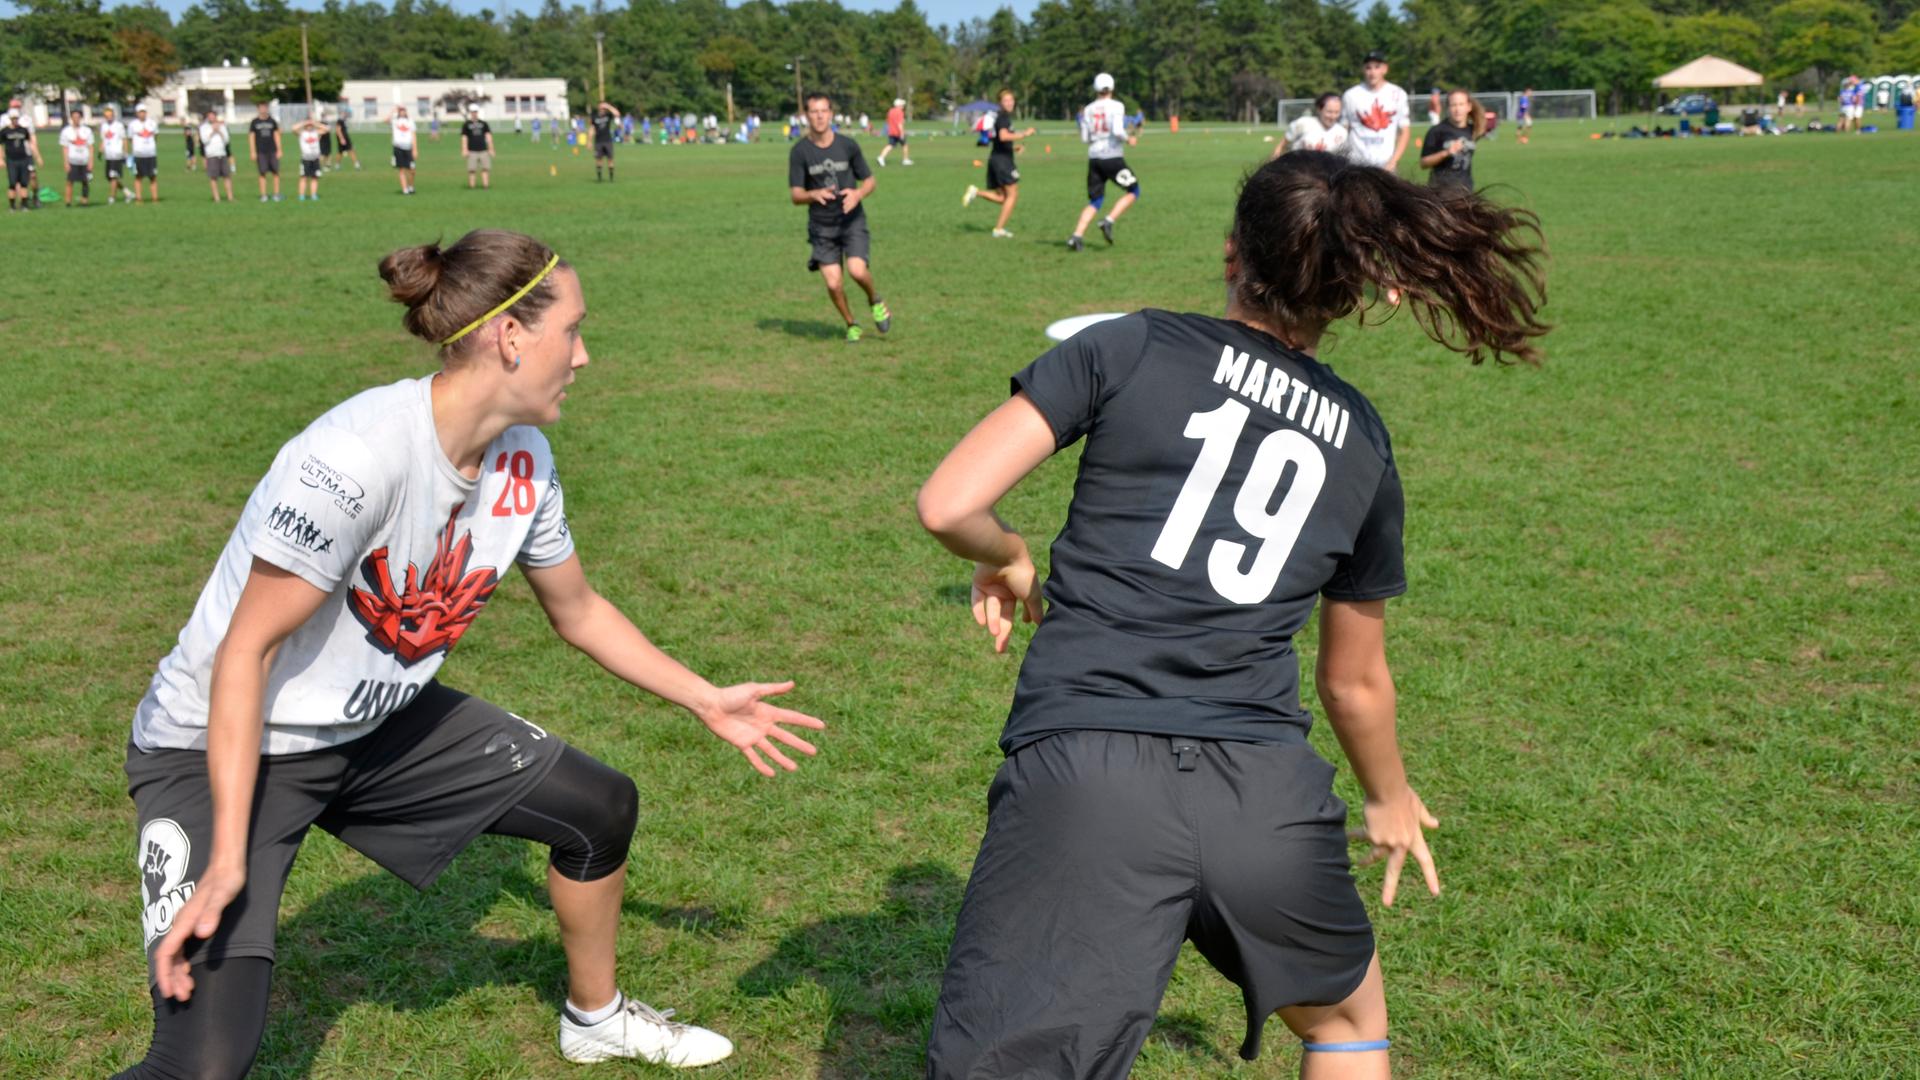 A mixed Ultimate Frisbee game in Devens, Mass. between the teams Boston Slow White and Toronto Union. Boston won the game and ultimately a trip to the national championships. 